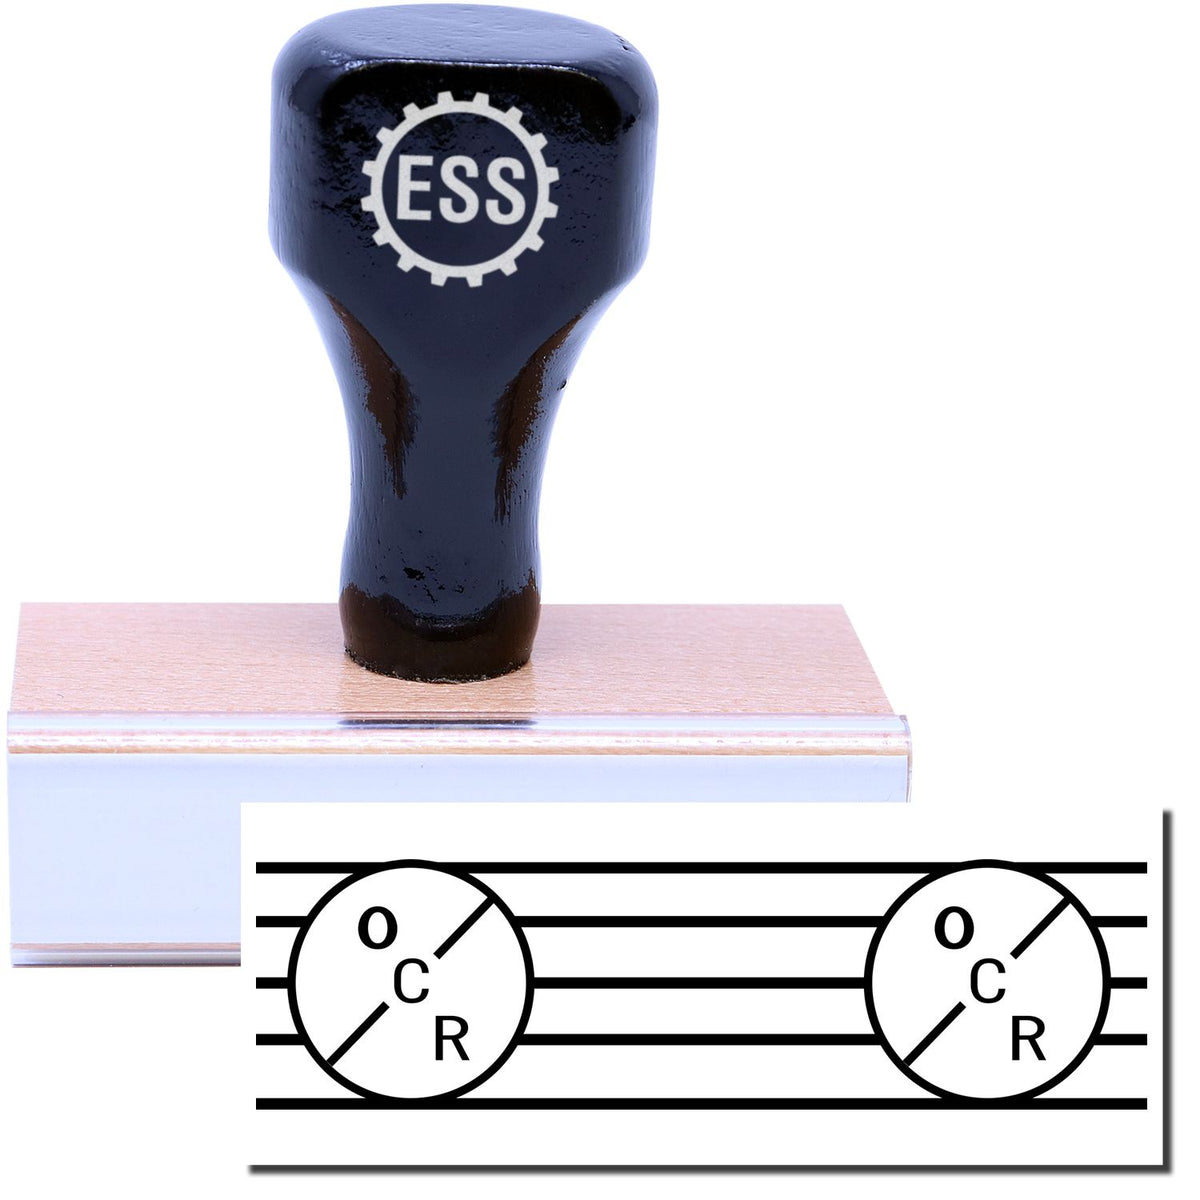 A stock office rubber stamp with a stamped image showing how the text &quot;OCR&quot; in a large font appears twice with extra design elements like lines and circles is displayed after stamping.